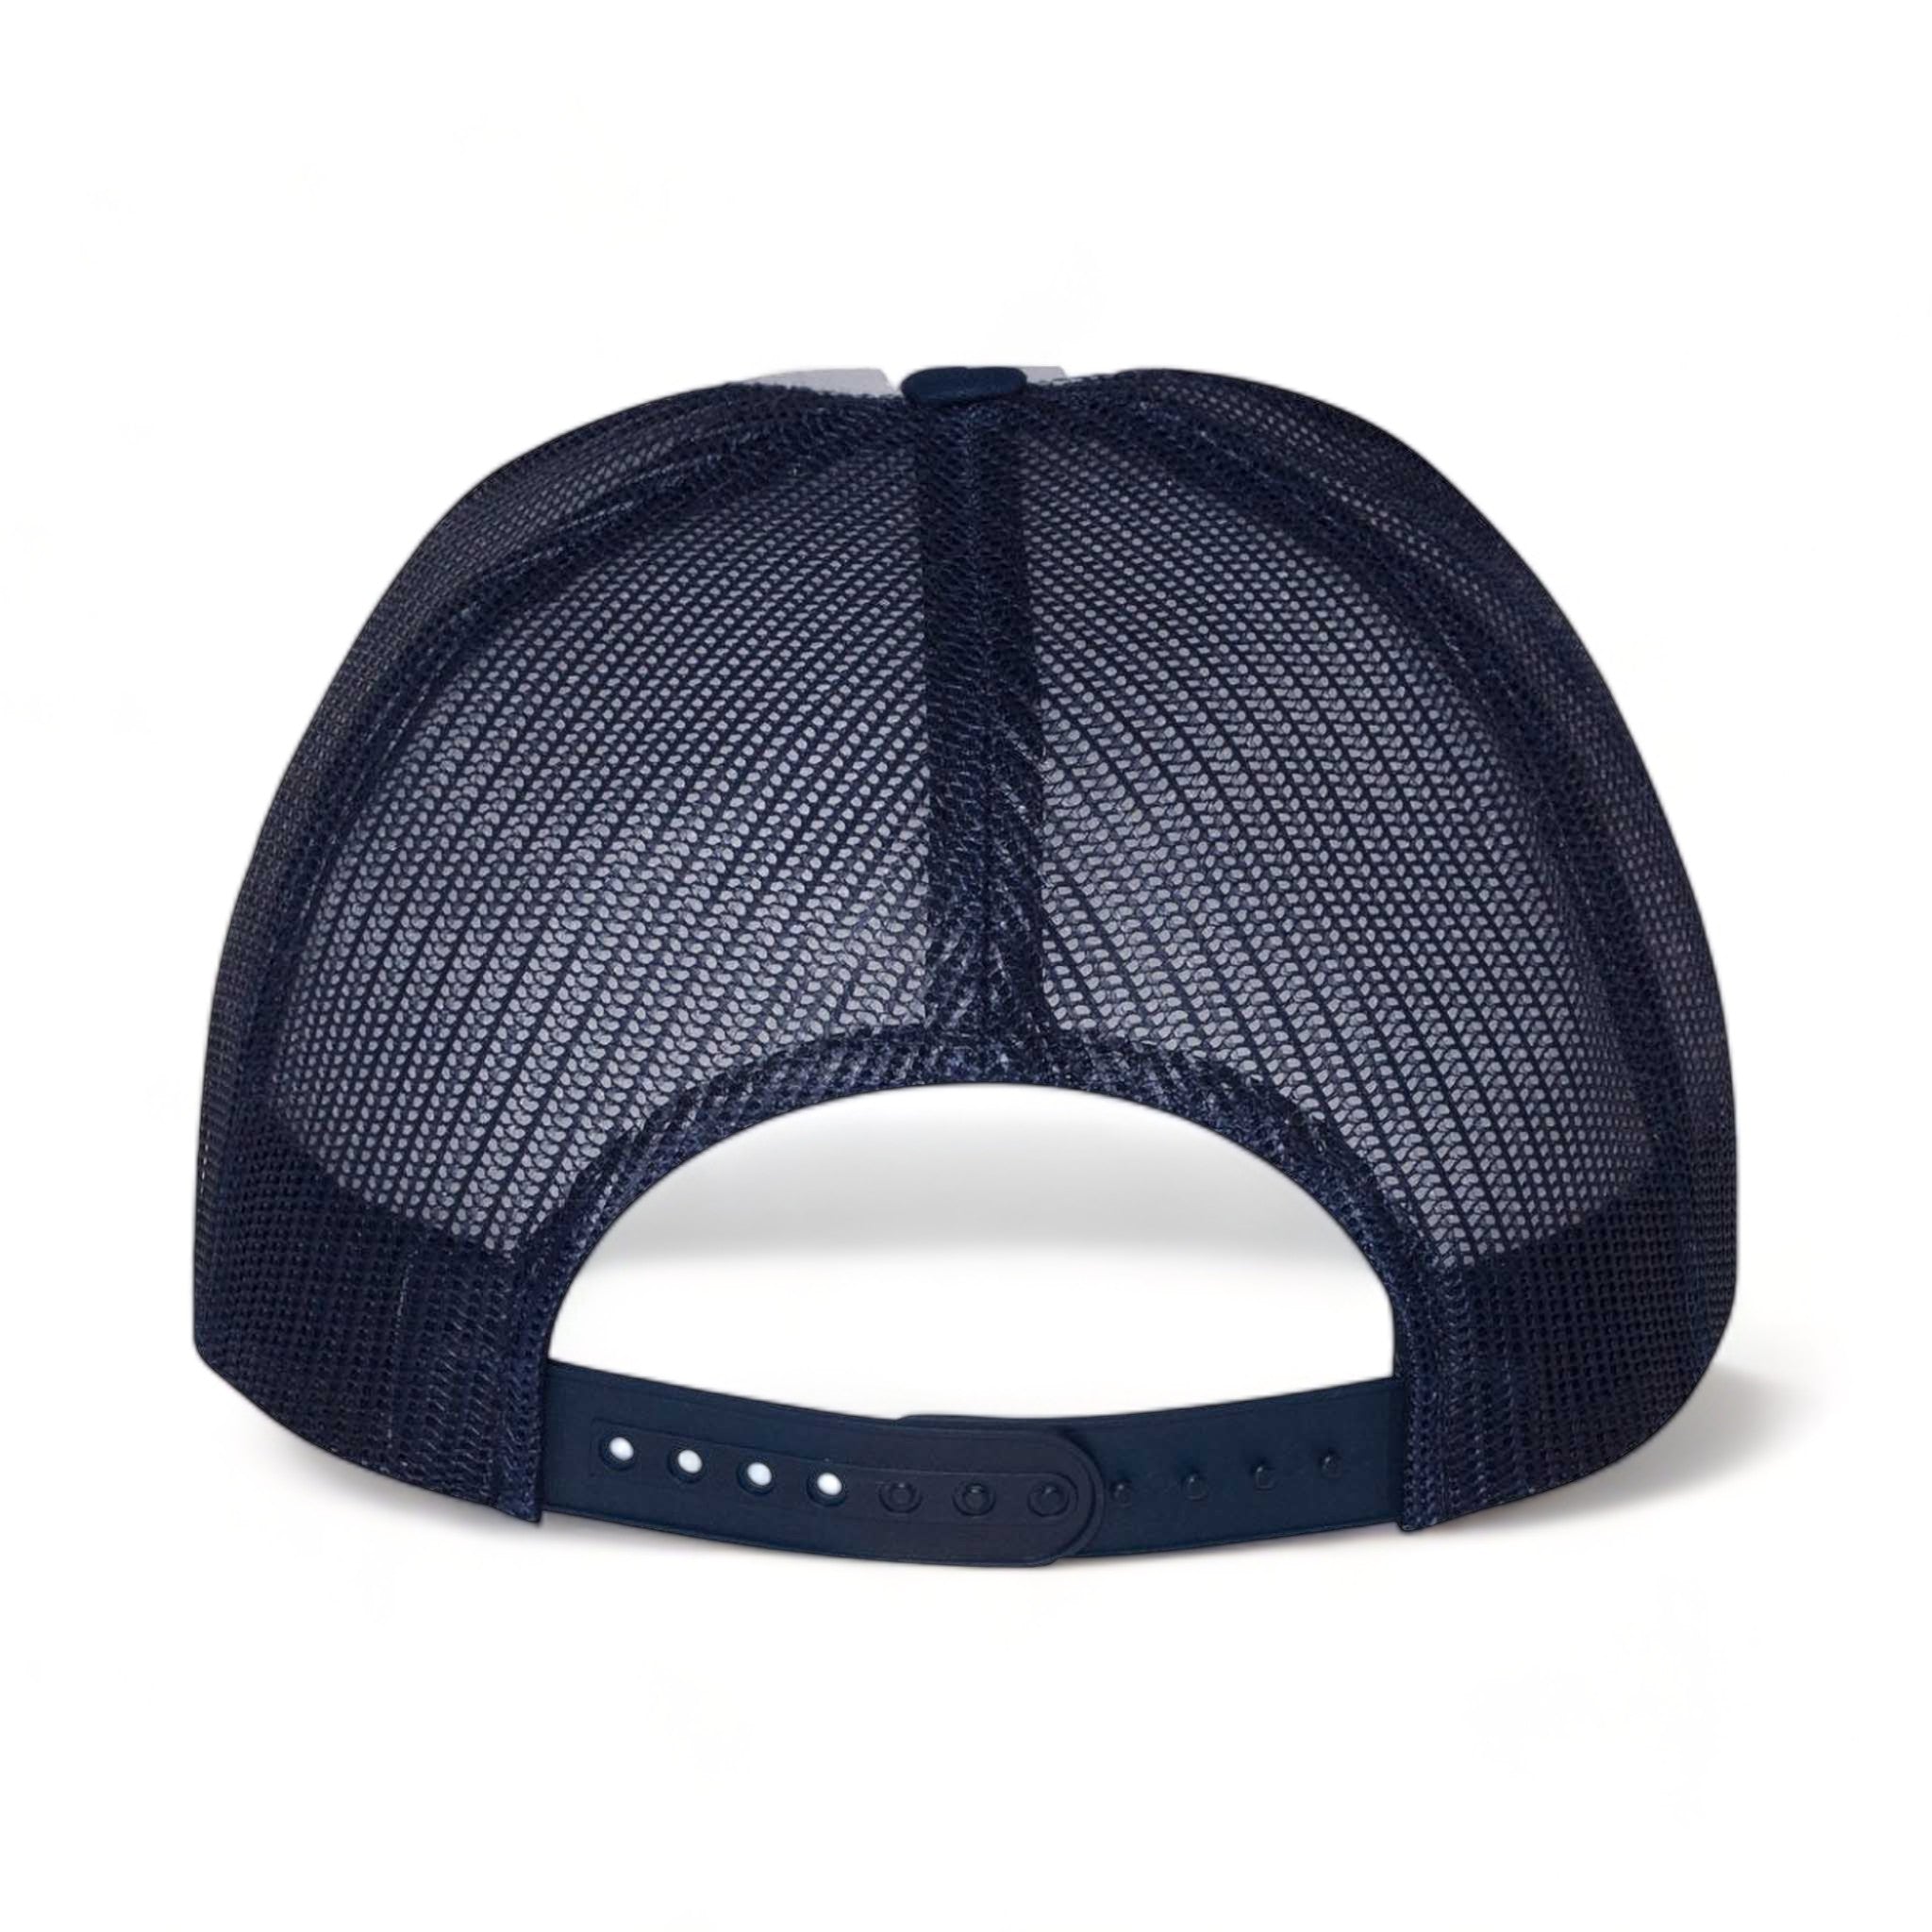 Back view of YP Classics 6006 custom hat in navy, white and navy